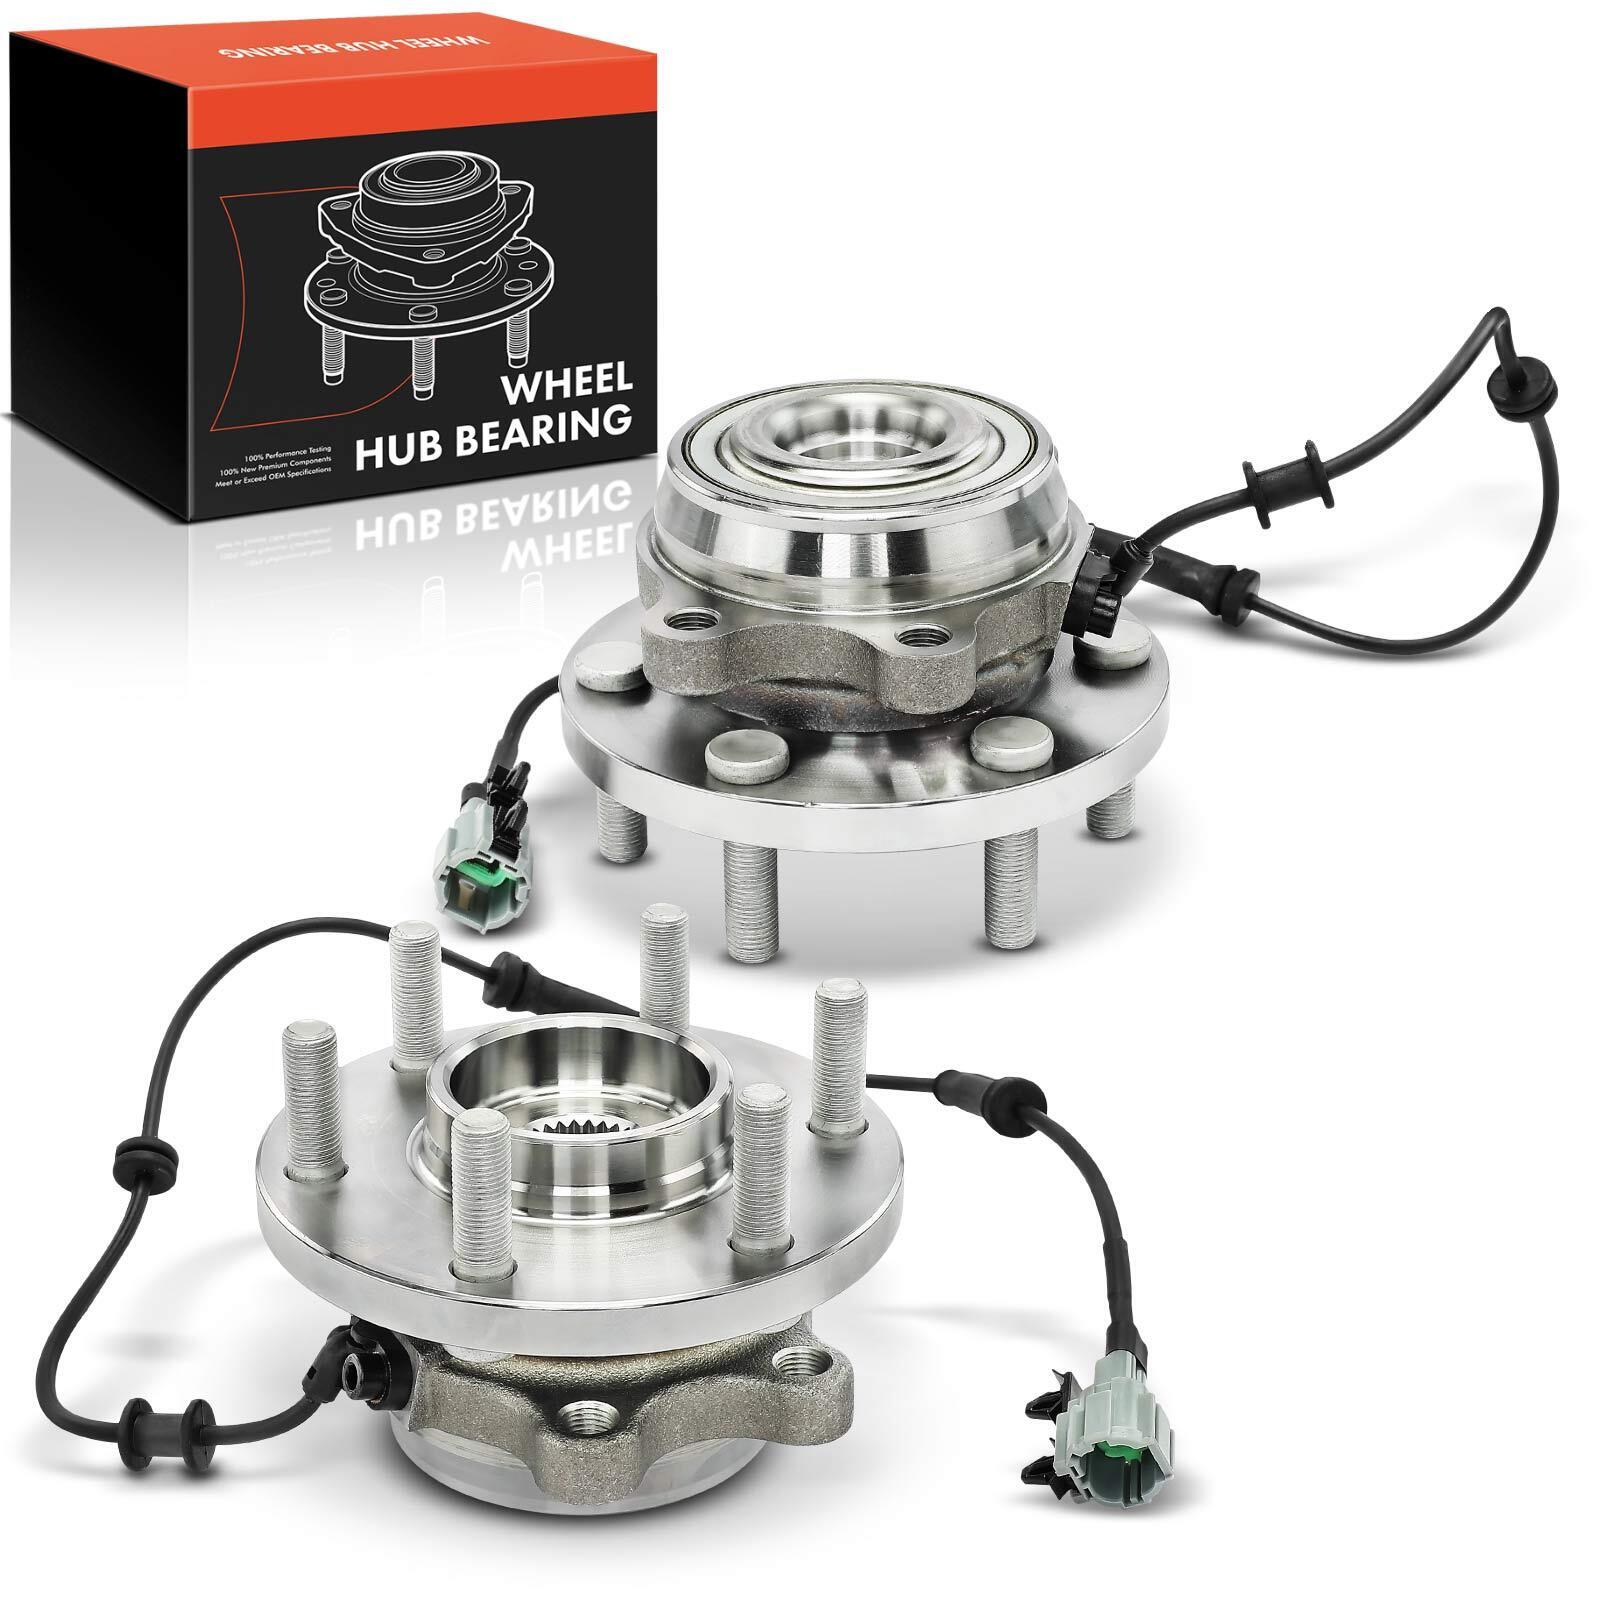 2 x Front Wheel Hub Bearing Assembly for Nissan Frontier Pathfinder Xterra 05-19